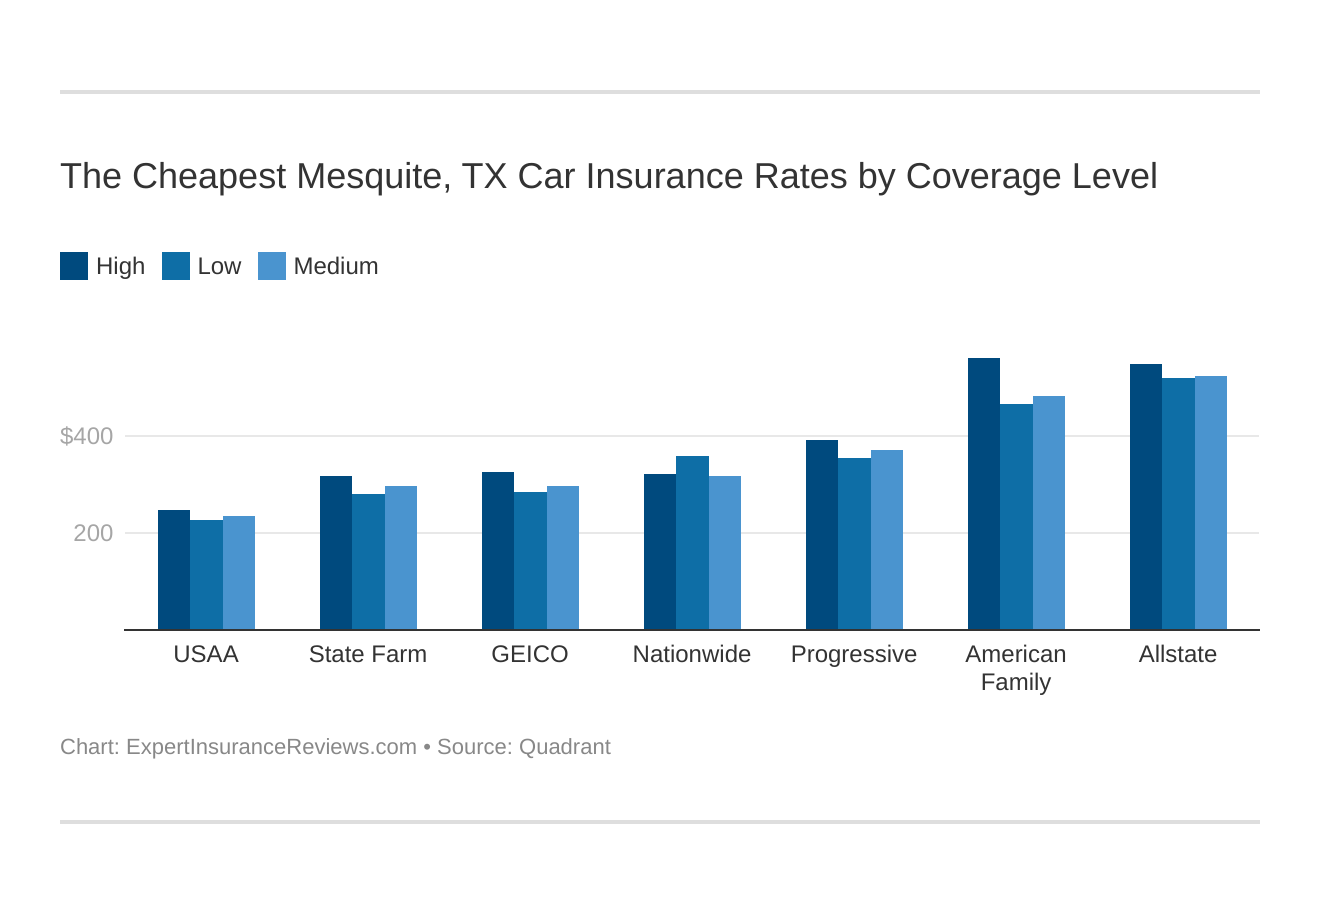 The Cheapest Mesquite, TX Car Insurance Rates by Coverage Level